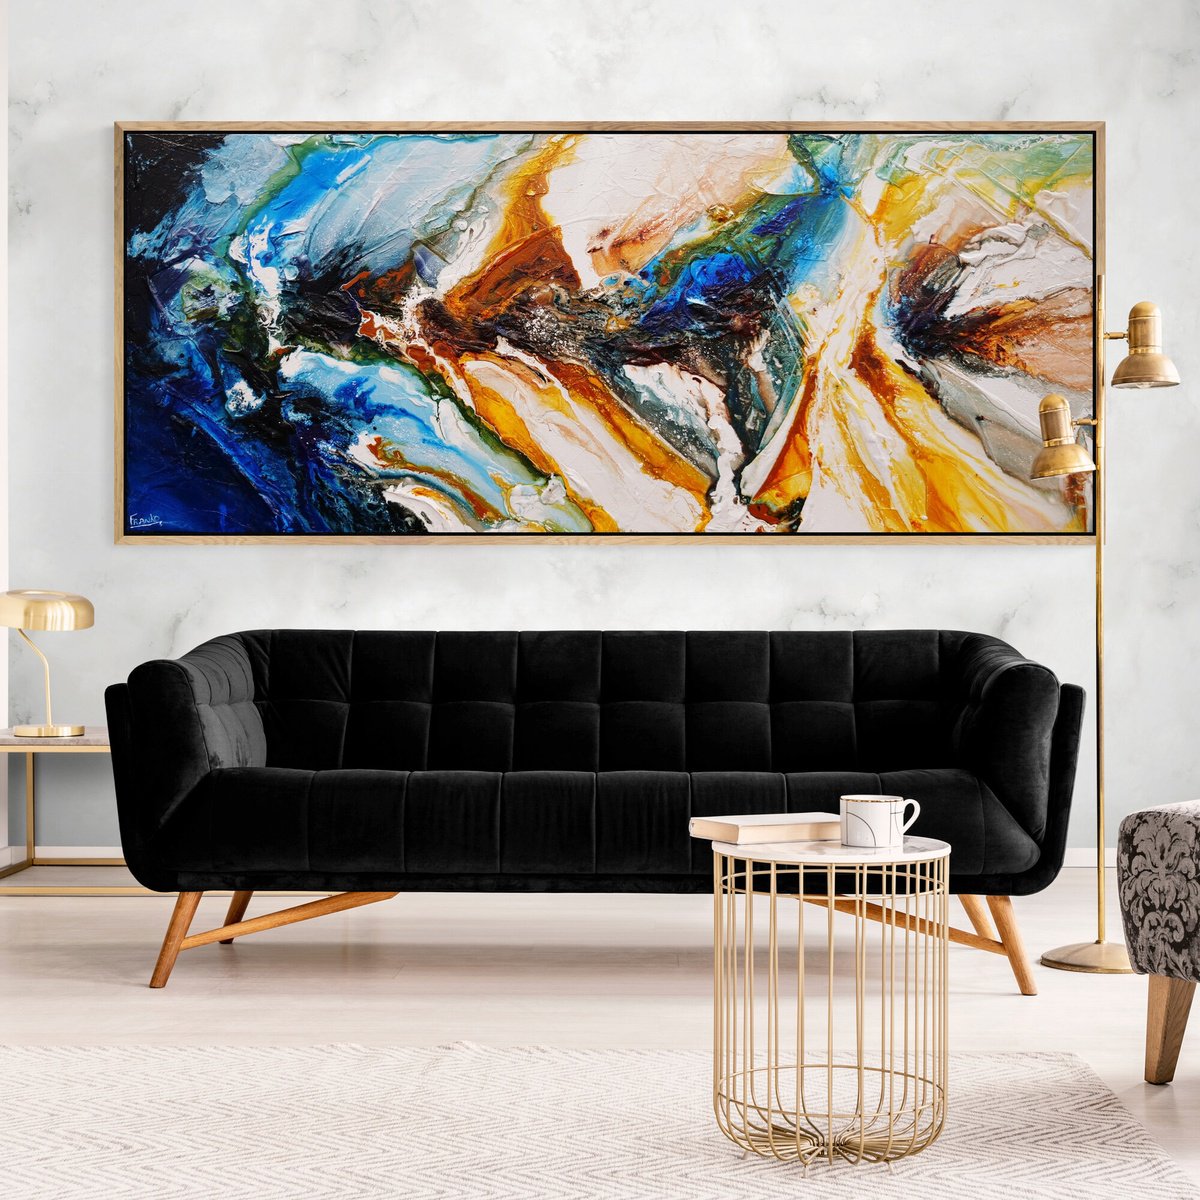 Paradise 240cm x 100cm Textured Abstract Art by Franko